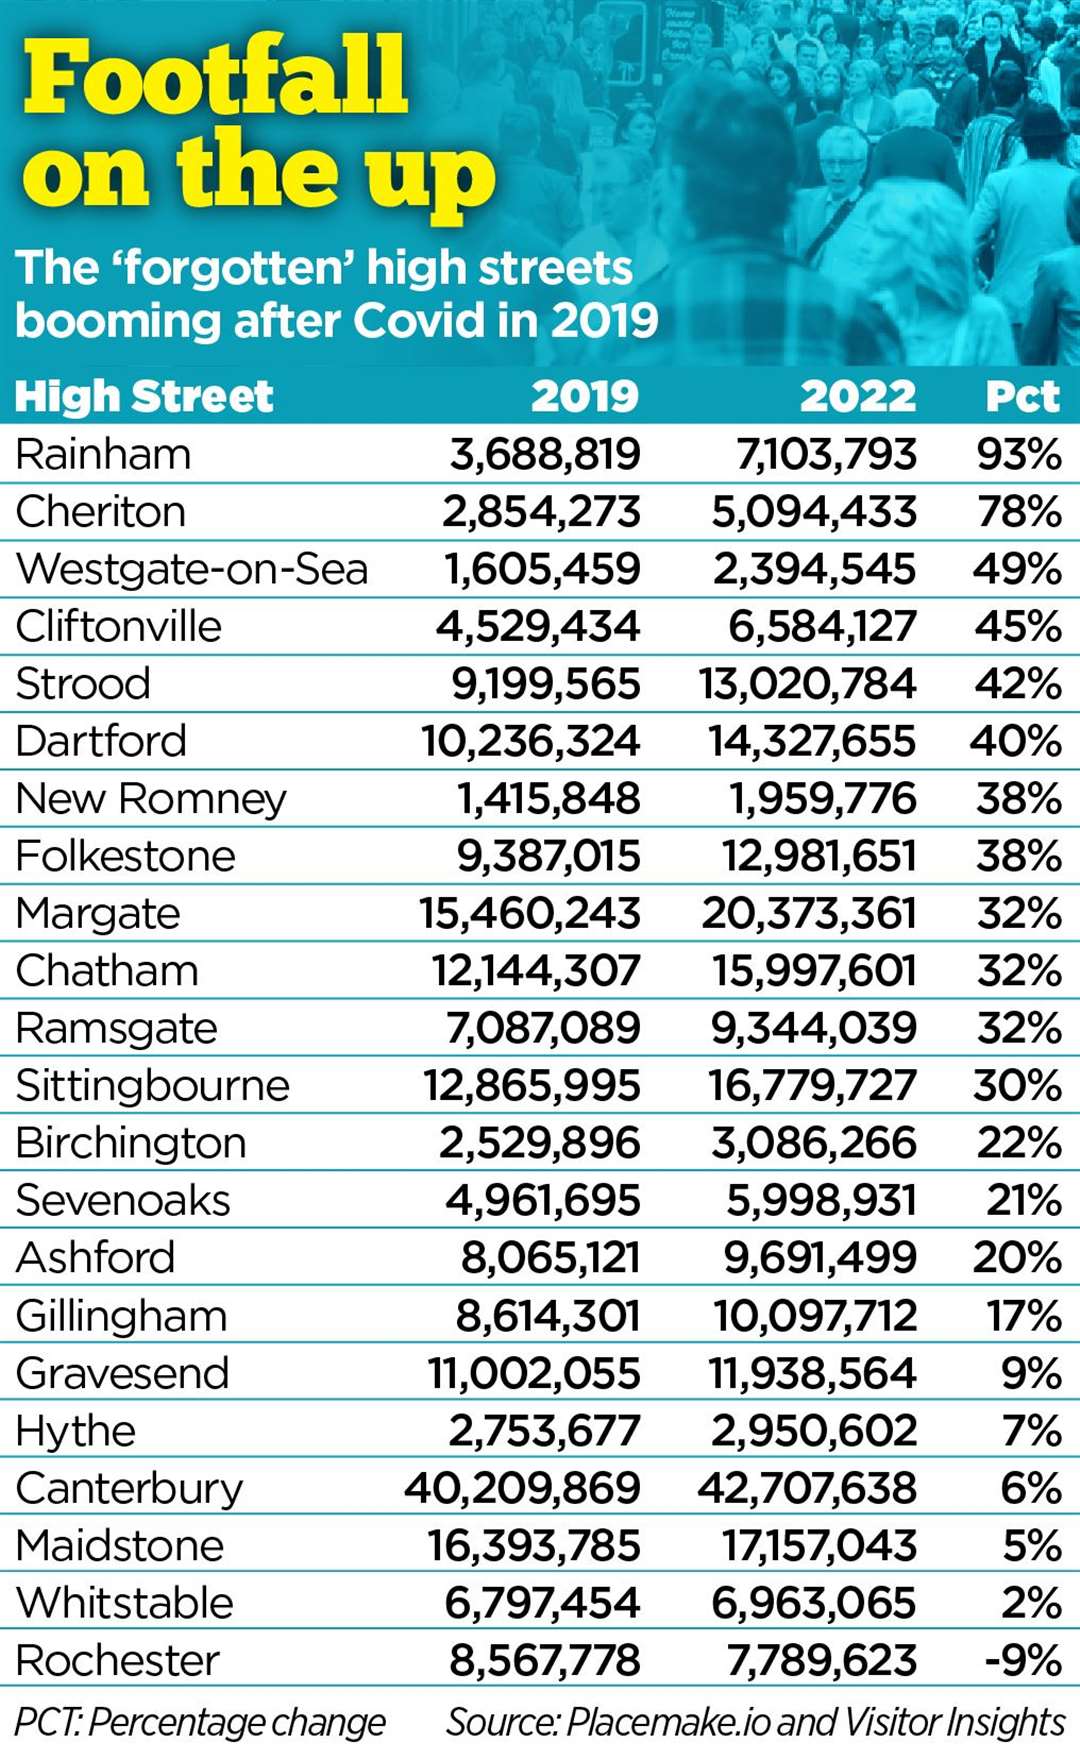 How footfall has changed in these high streets, comparing 2019 - before the pandemic - to 2022. While researchers Placemake.io and Visitor Insights gathered data from most Kent high streets, places like Broadstairs, Dover and Deal were not included